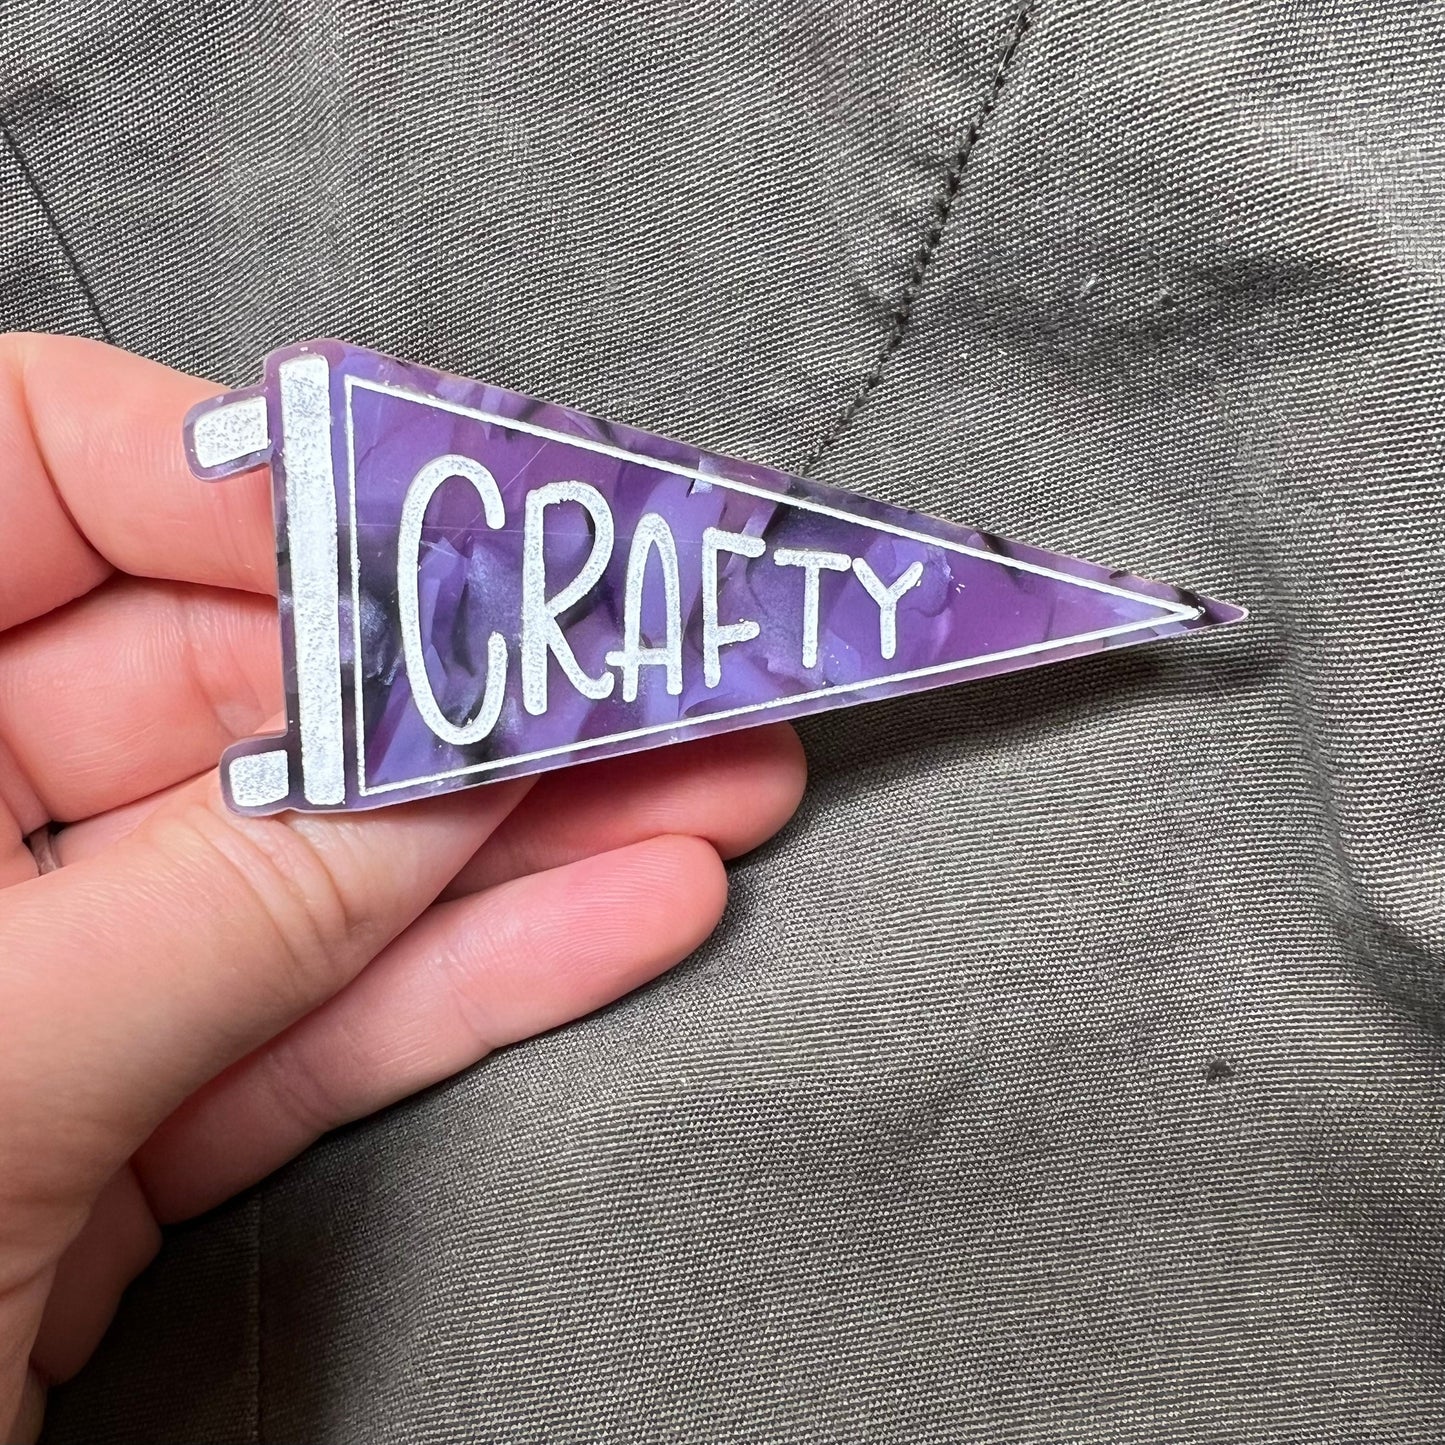 Crafty Badge - Laser Cut Brooch - Artist accessory - pin back - Gift for crafter - pennant